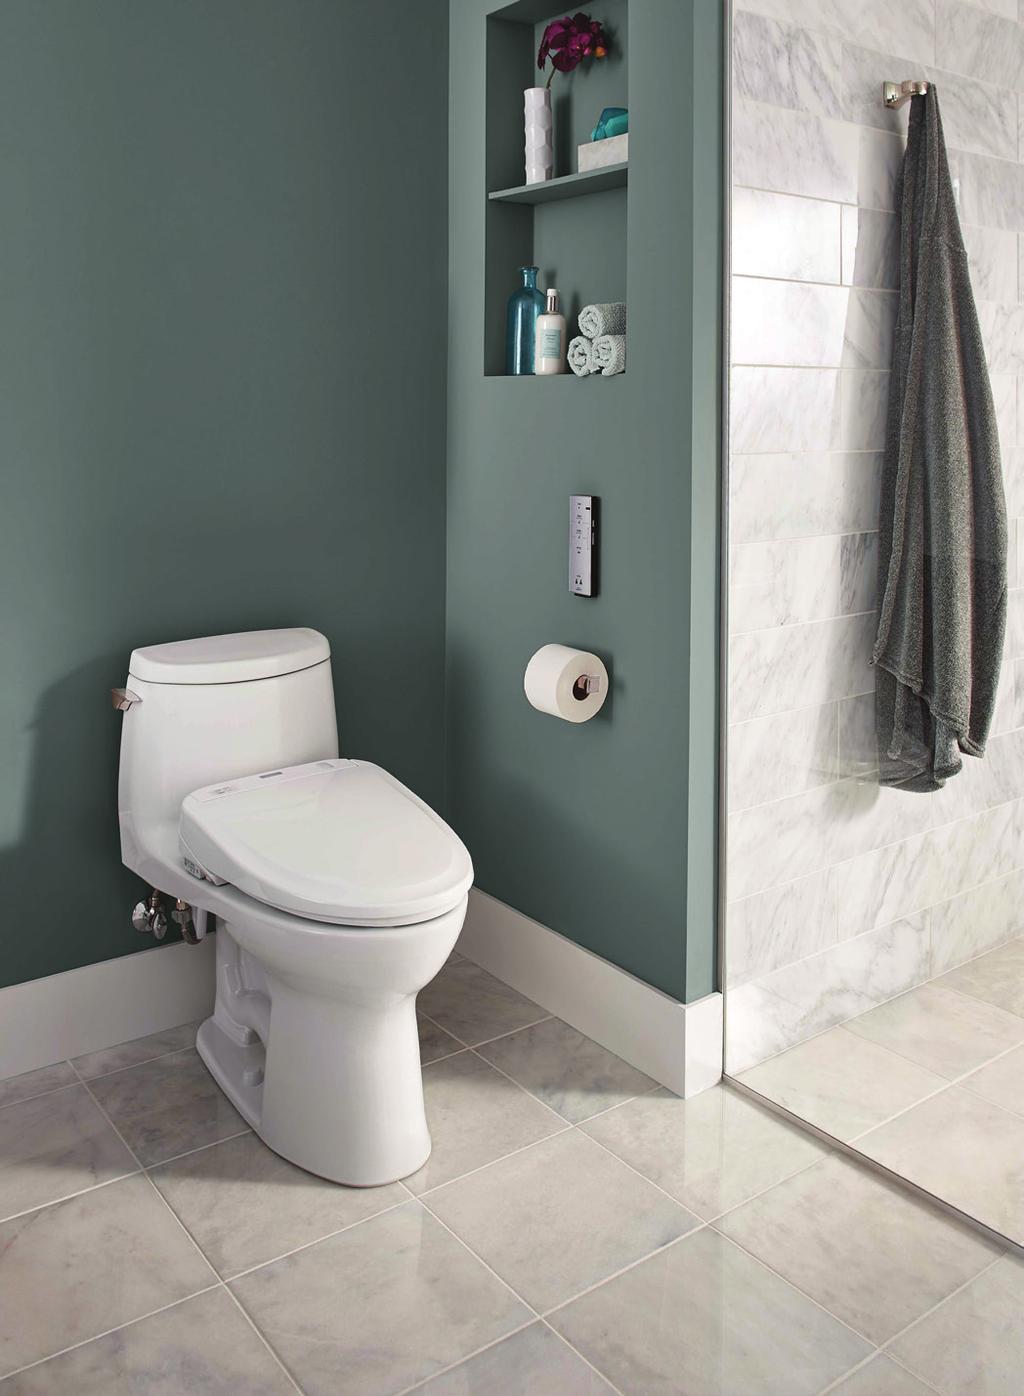 THE NEW STANDARD OF CLEAN. Enjoy the satisfaction of warm water cleansing with the Washlet Connect+.